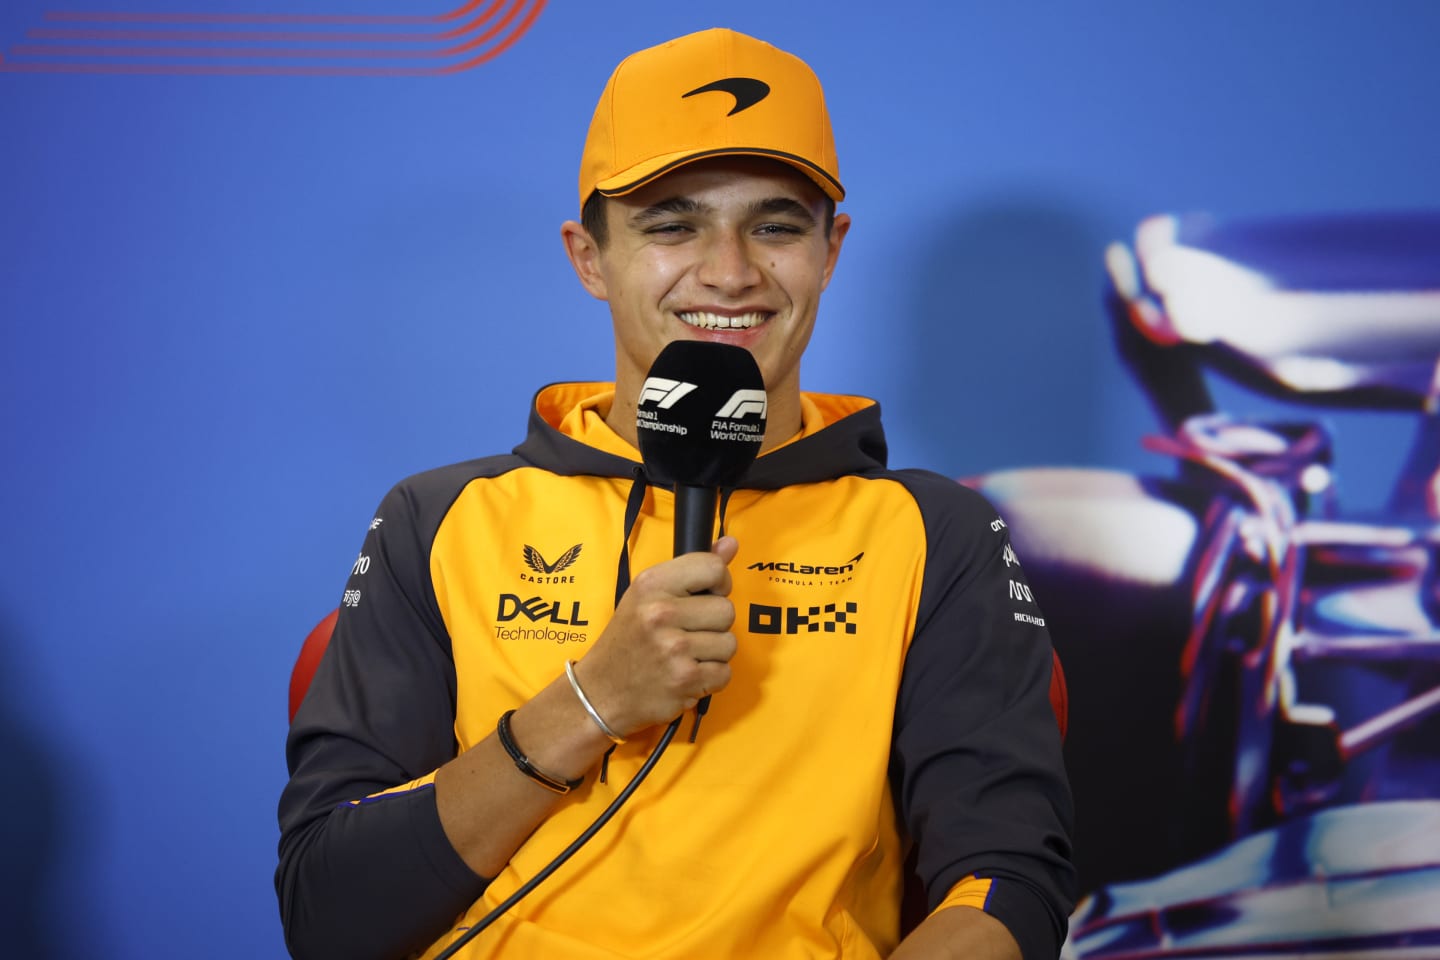 AUSTIN, TEXAS - OCTOBER 20: Lando Norris of Great Britain and McLaren attends the Drivers Press Conference during previews ahead of the F1 Grand Prix of USA at Circuit of The Americas on October 20, 2022 in Austin, Texas. (Photo by Jared C. Tilton/Getty Images)